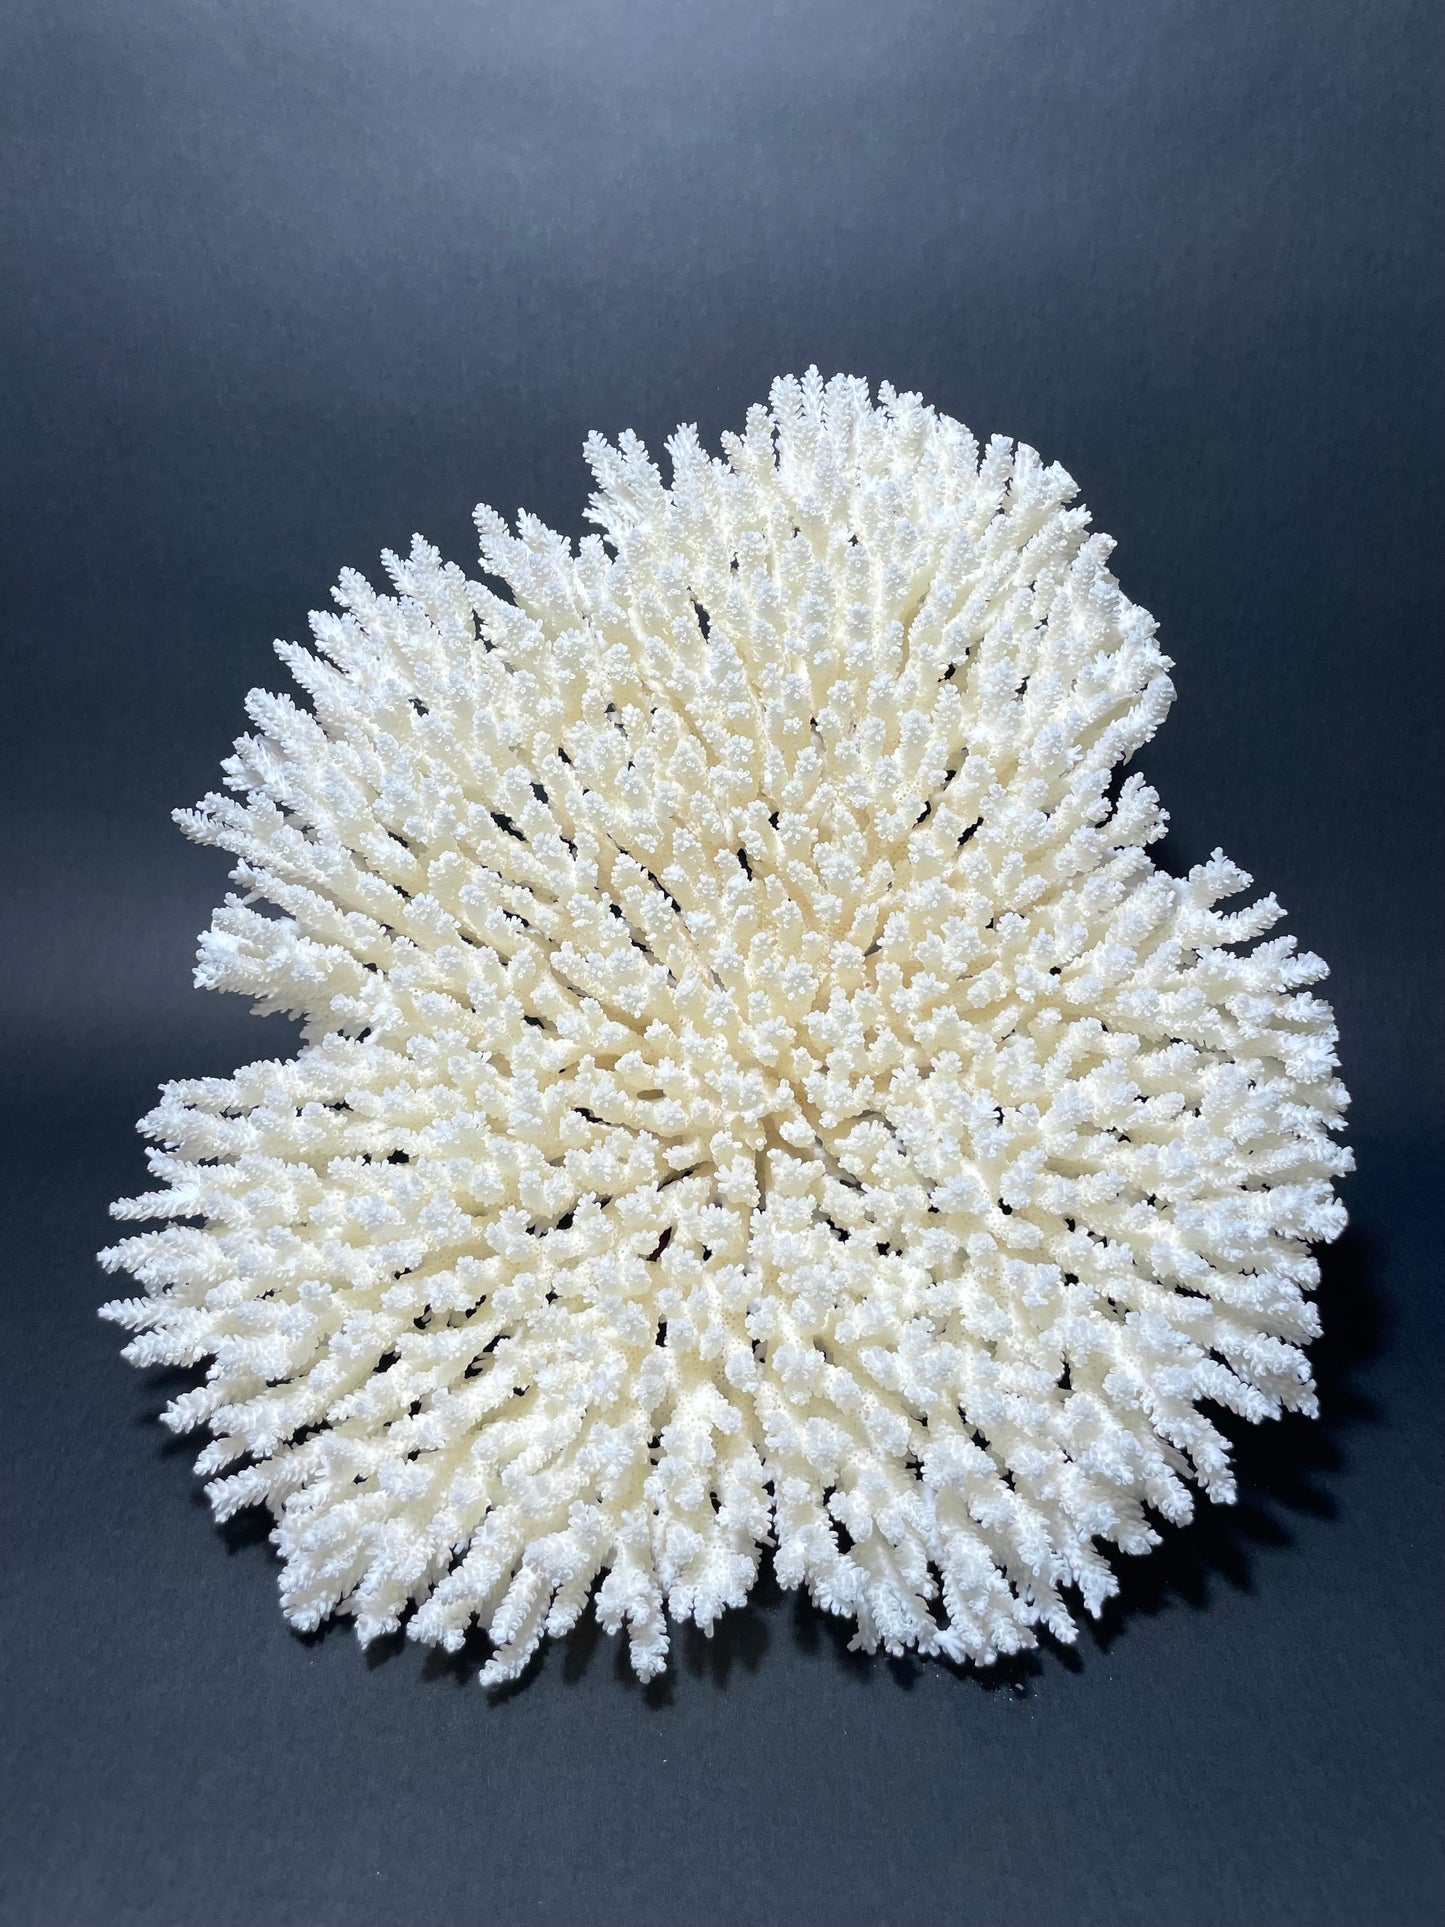 Table Coral 17” x 18” - Treasures from Beneath